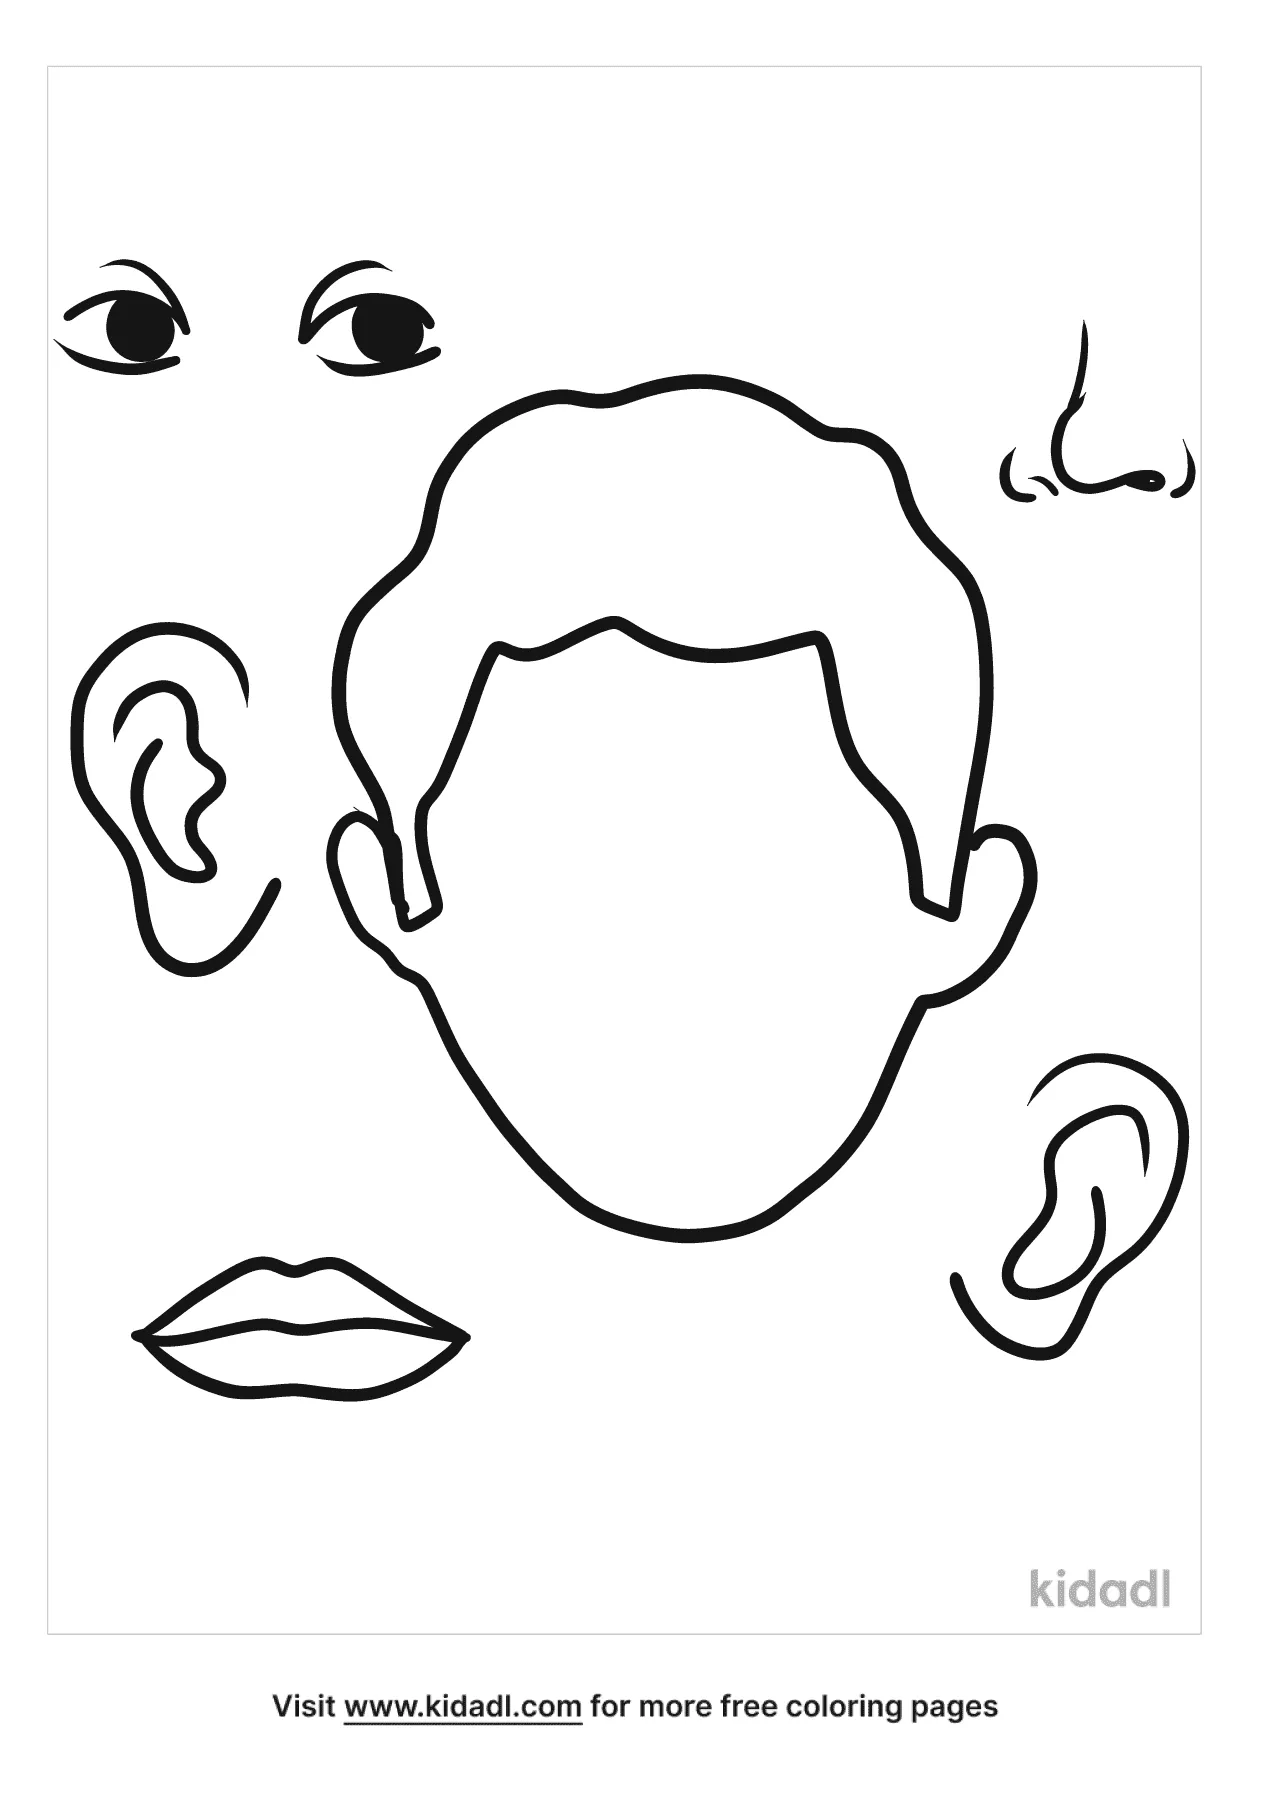 Build A Face Coloring Page Free Face Body Coloring Page Kidadl